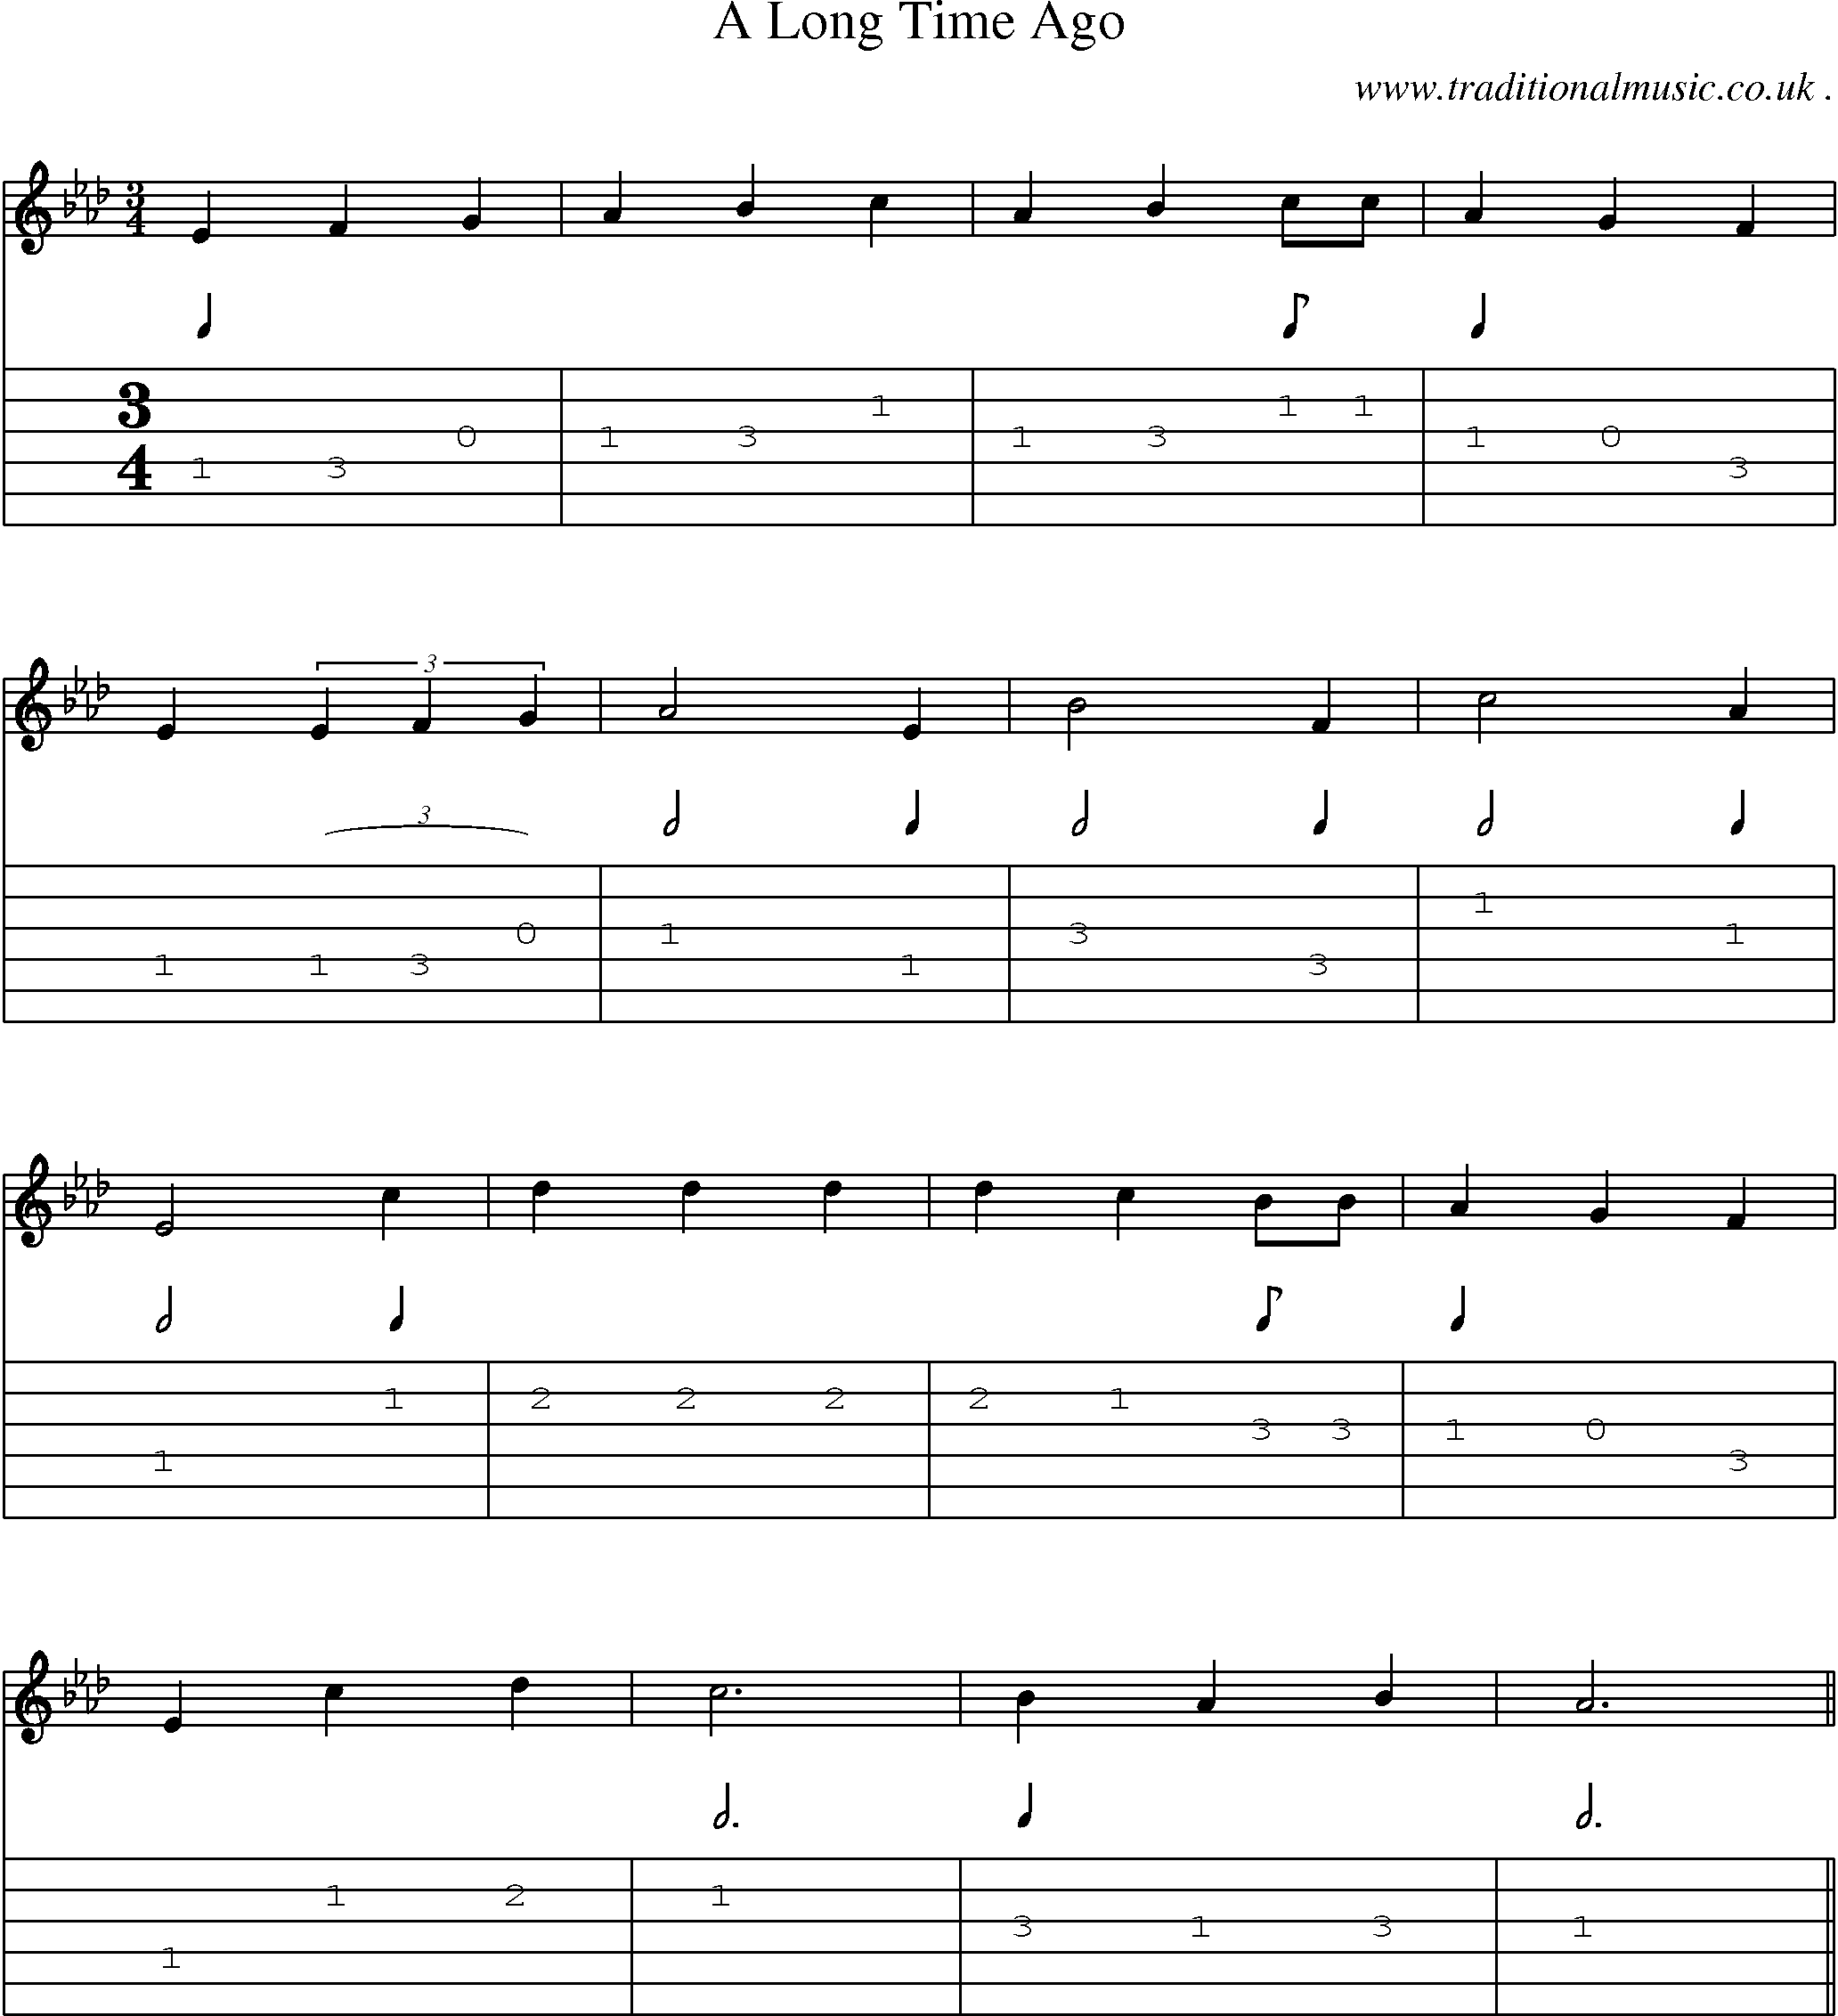 Sheet-Music and Guitar Tabs for A Long Time Ago